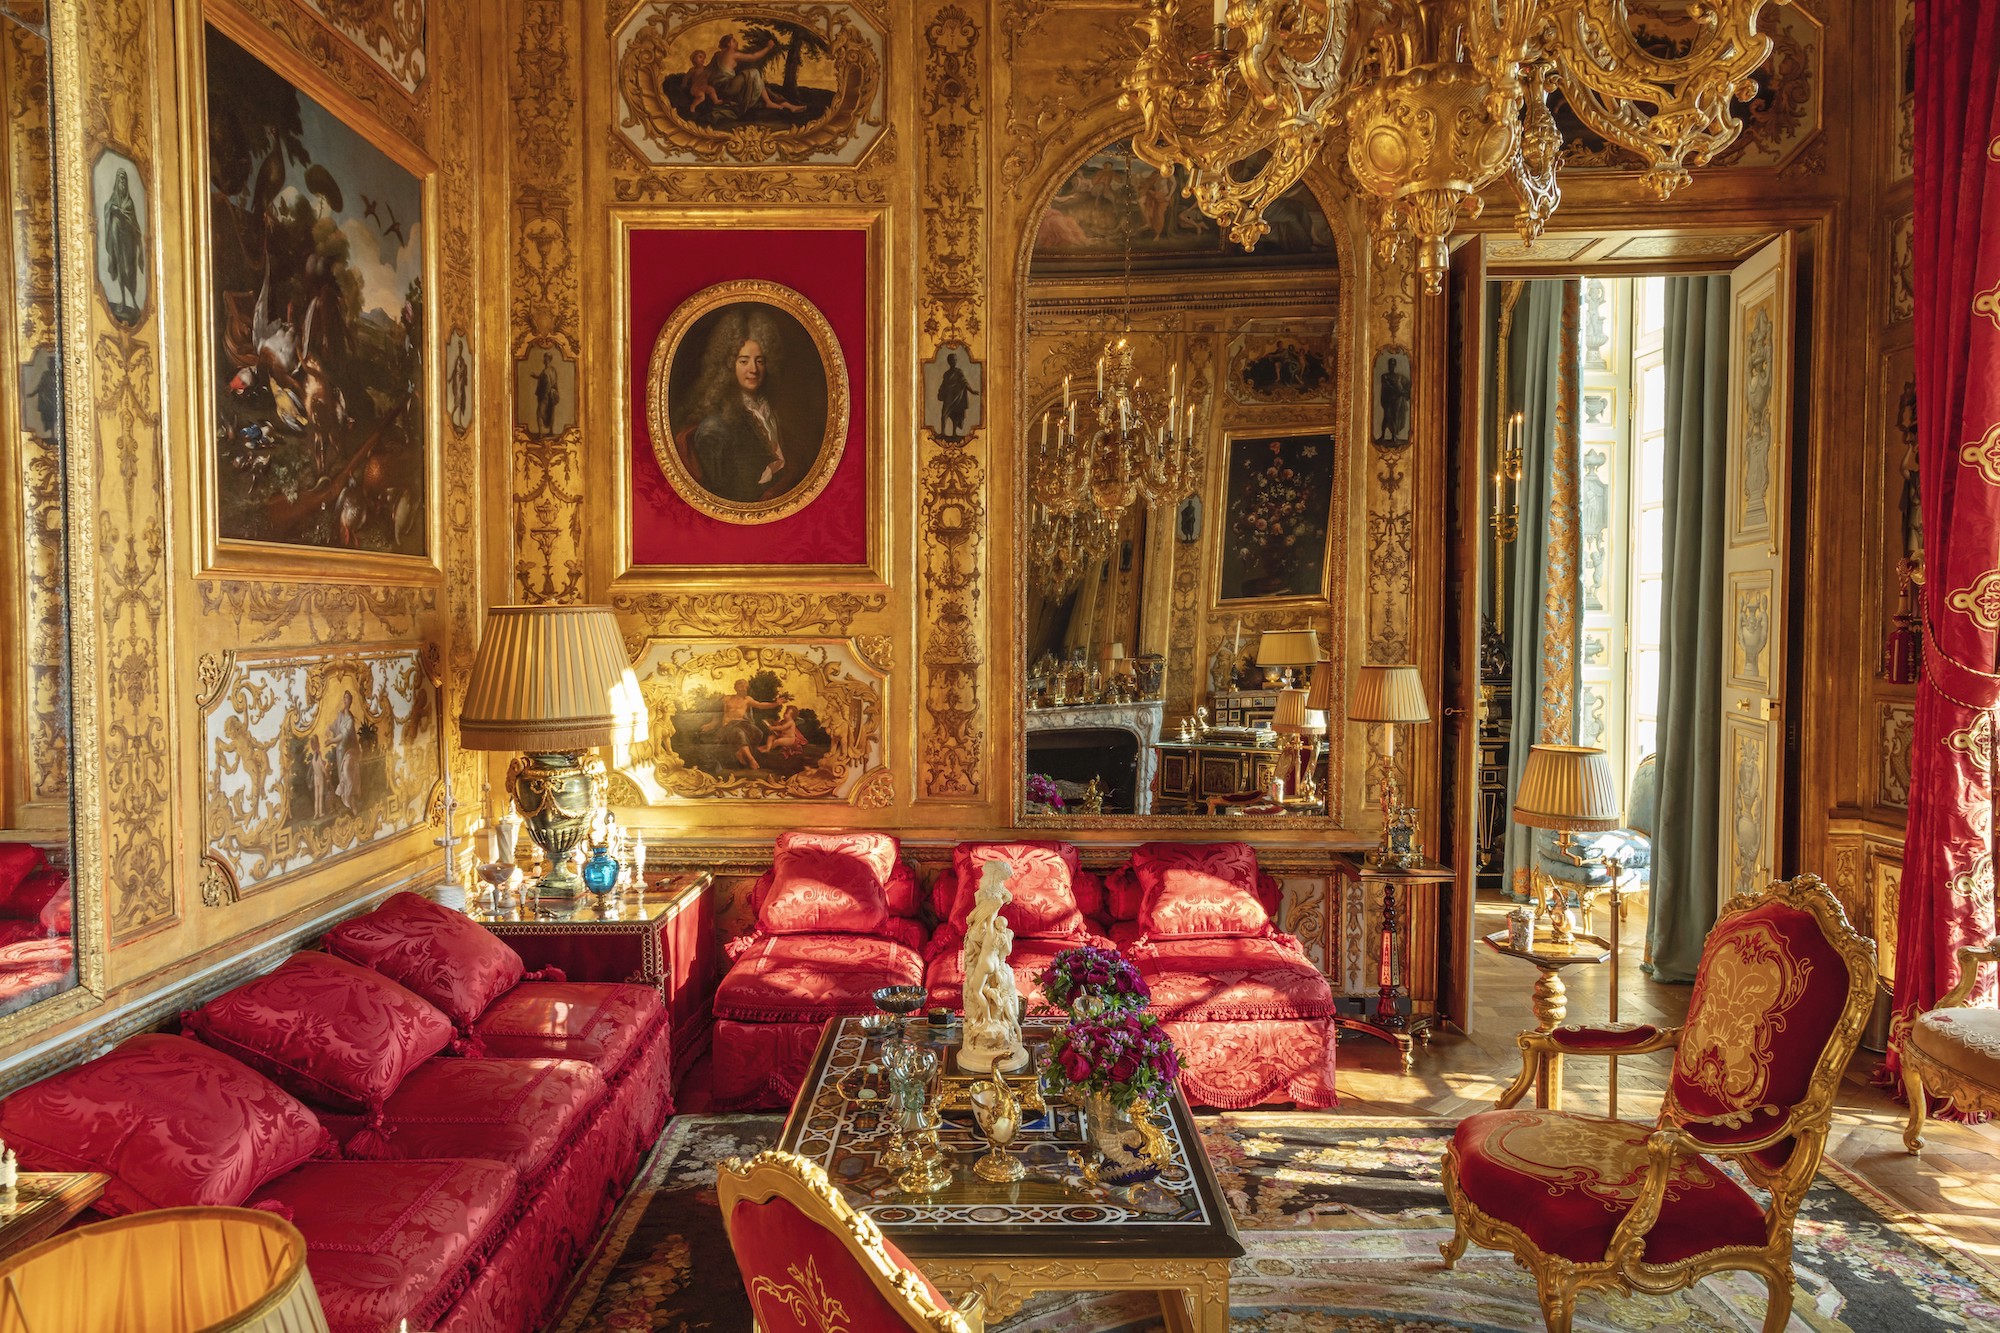 The landmark 61-room Hôtel Lambert formed a lavish backdrop for the private collection of Prince Abdullah bin Khalifa al-Thani, which is now being auctioned by Sotheby's (Effect Magazine)